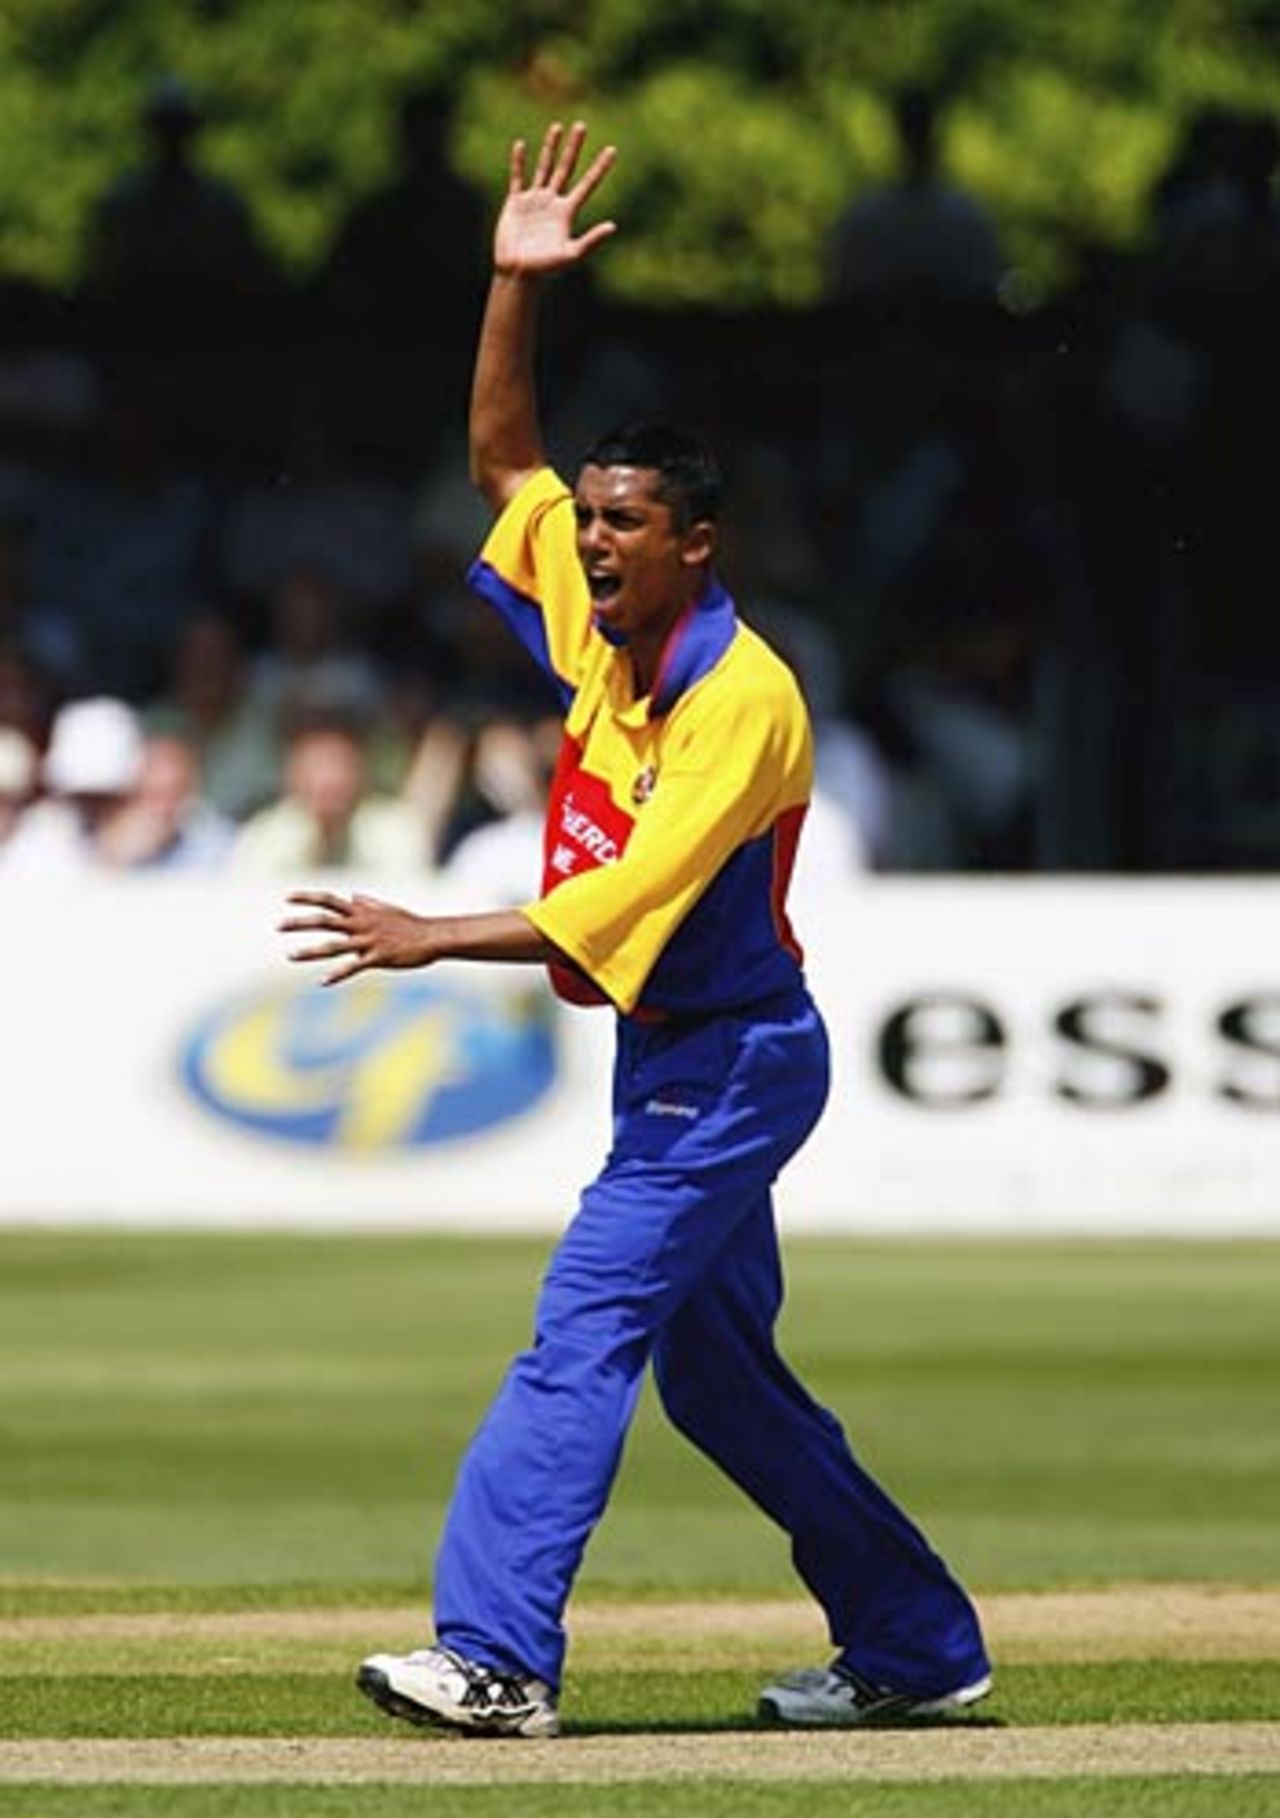 Jahid Ahmed took 4 for 32 on his one-day debut as Sri Lanka struggled to 172 all out, Essex v Sri Lankans, Chelmsford, June 9, 2006